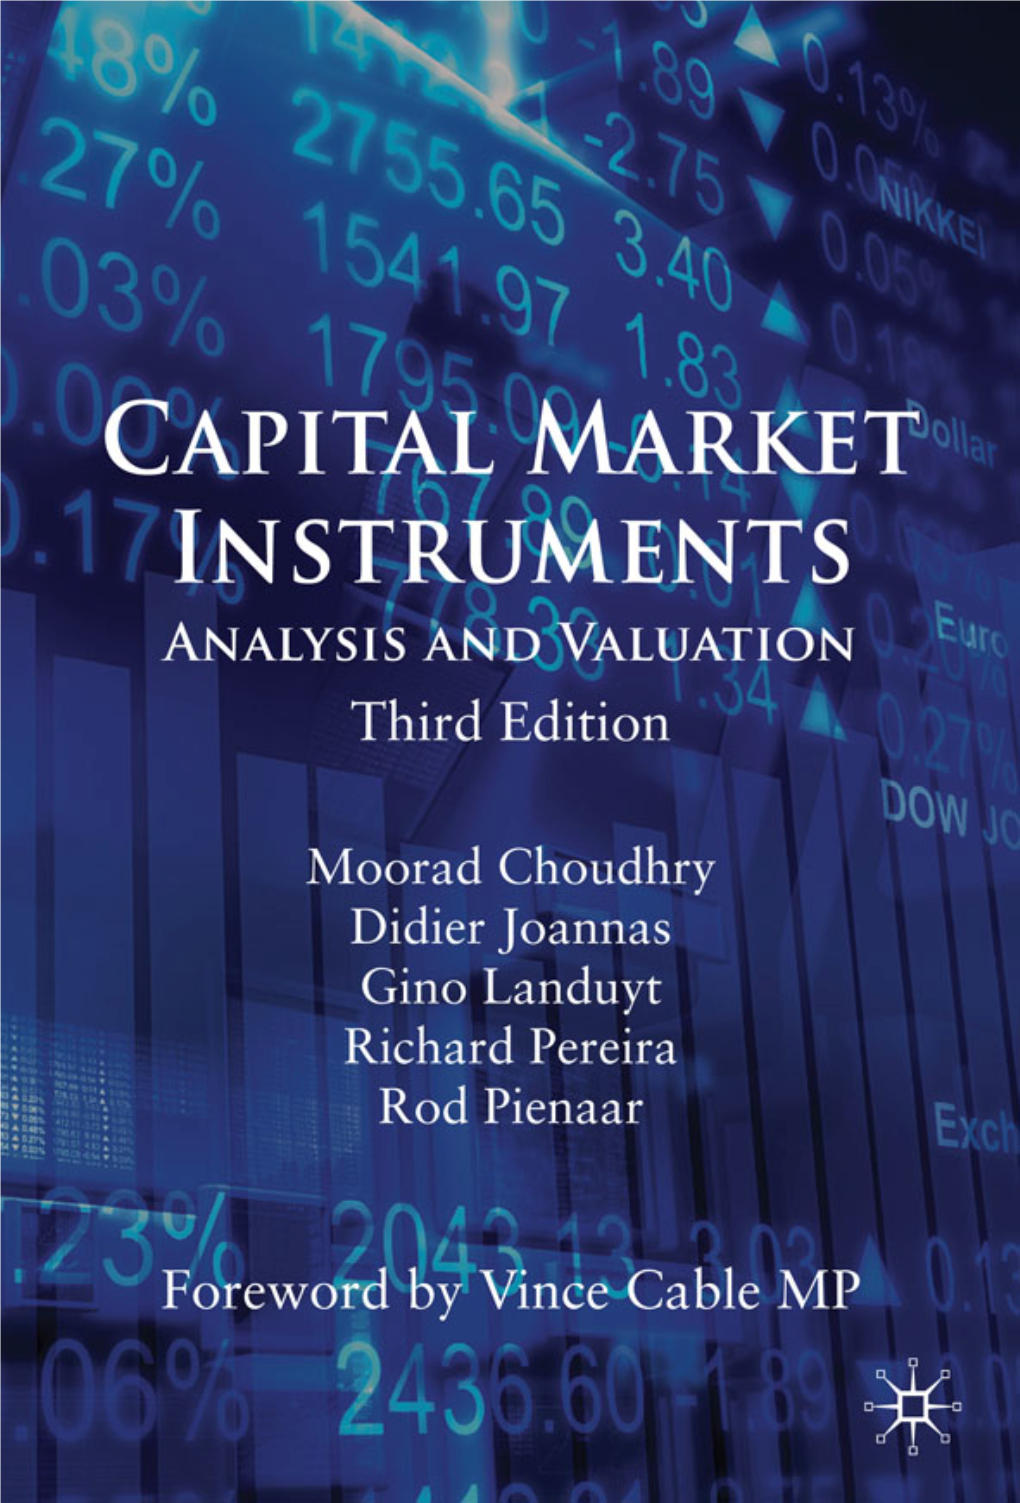 Capital Market Instruments: Analysis and Valuation, Third Edition